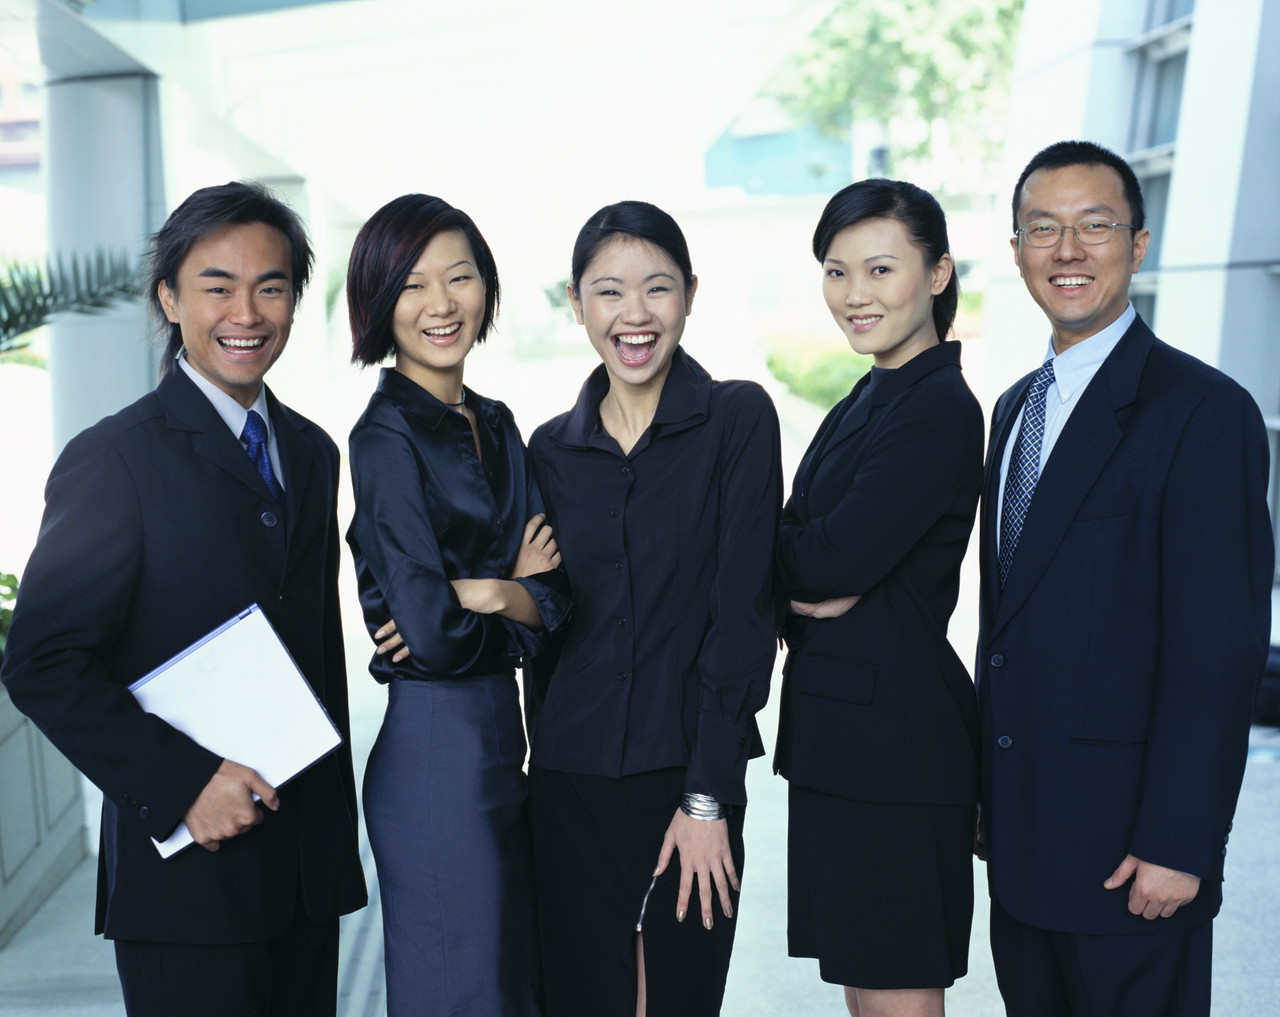 A photograph of a group of happy, smiling business people.